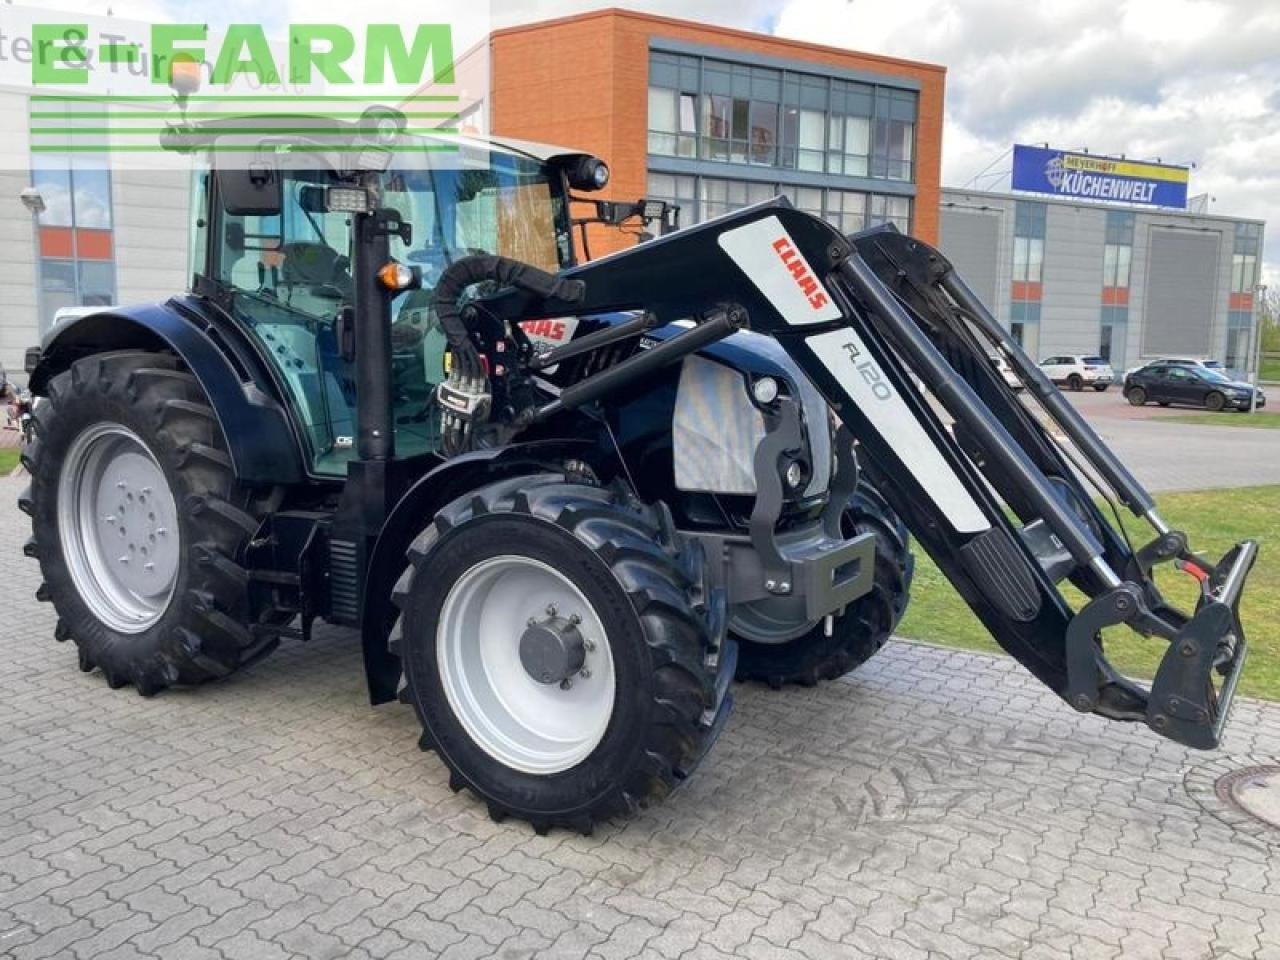 Farm tractor CLAAS arion 430 cis-panoramic